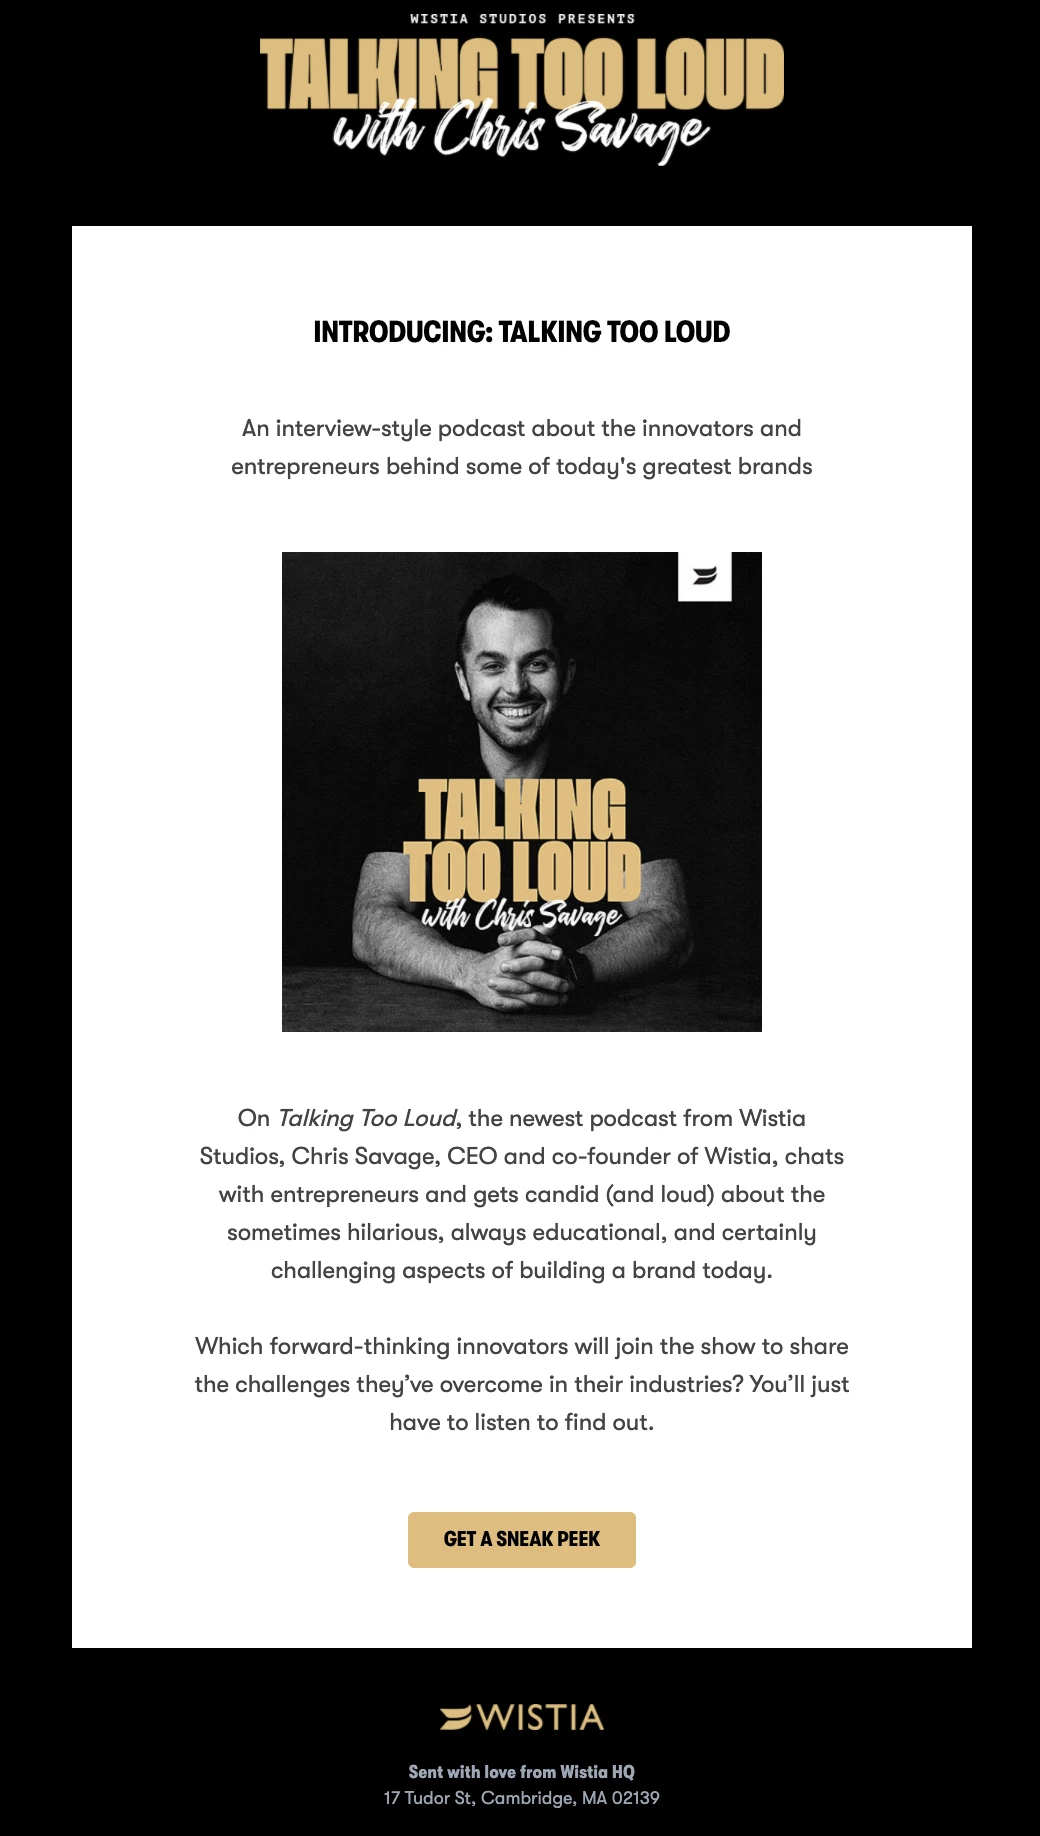 Podcast newsletter from Talking Too Loud with Chris Savage